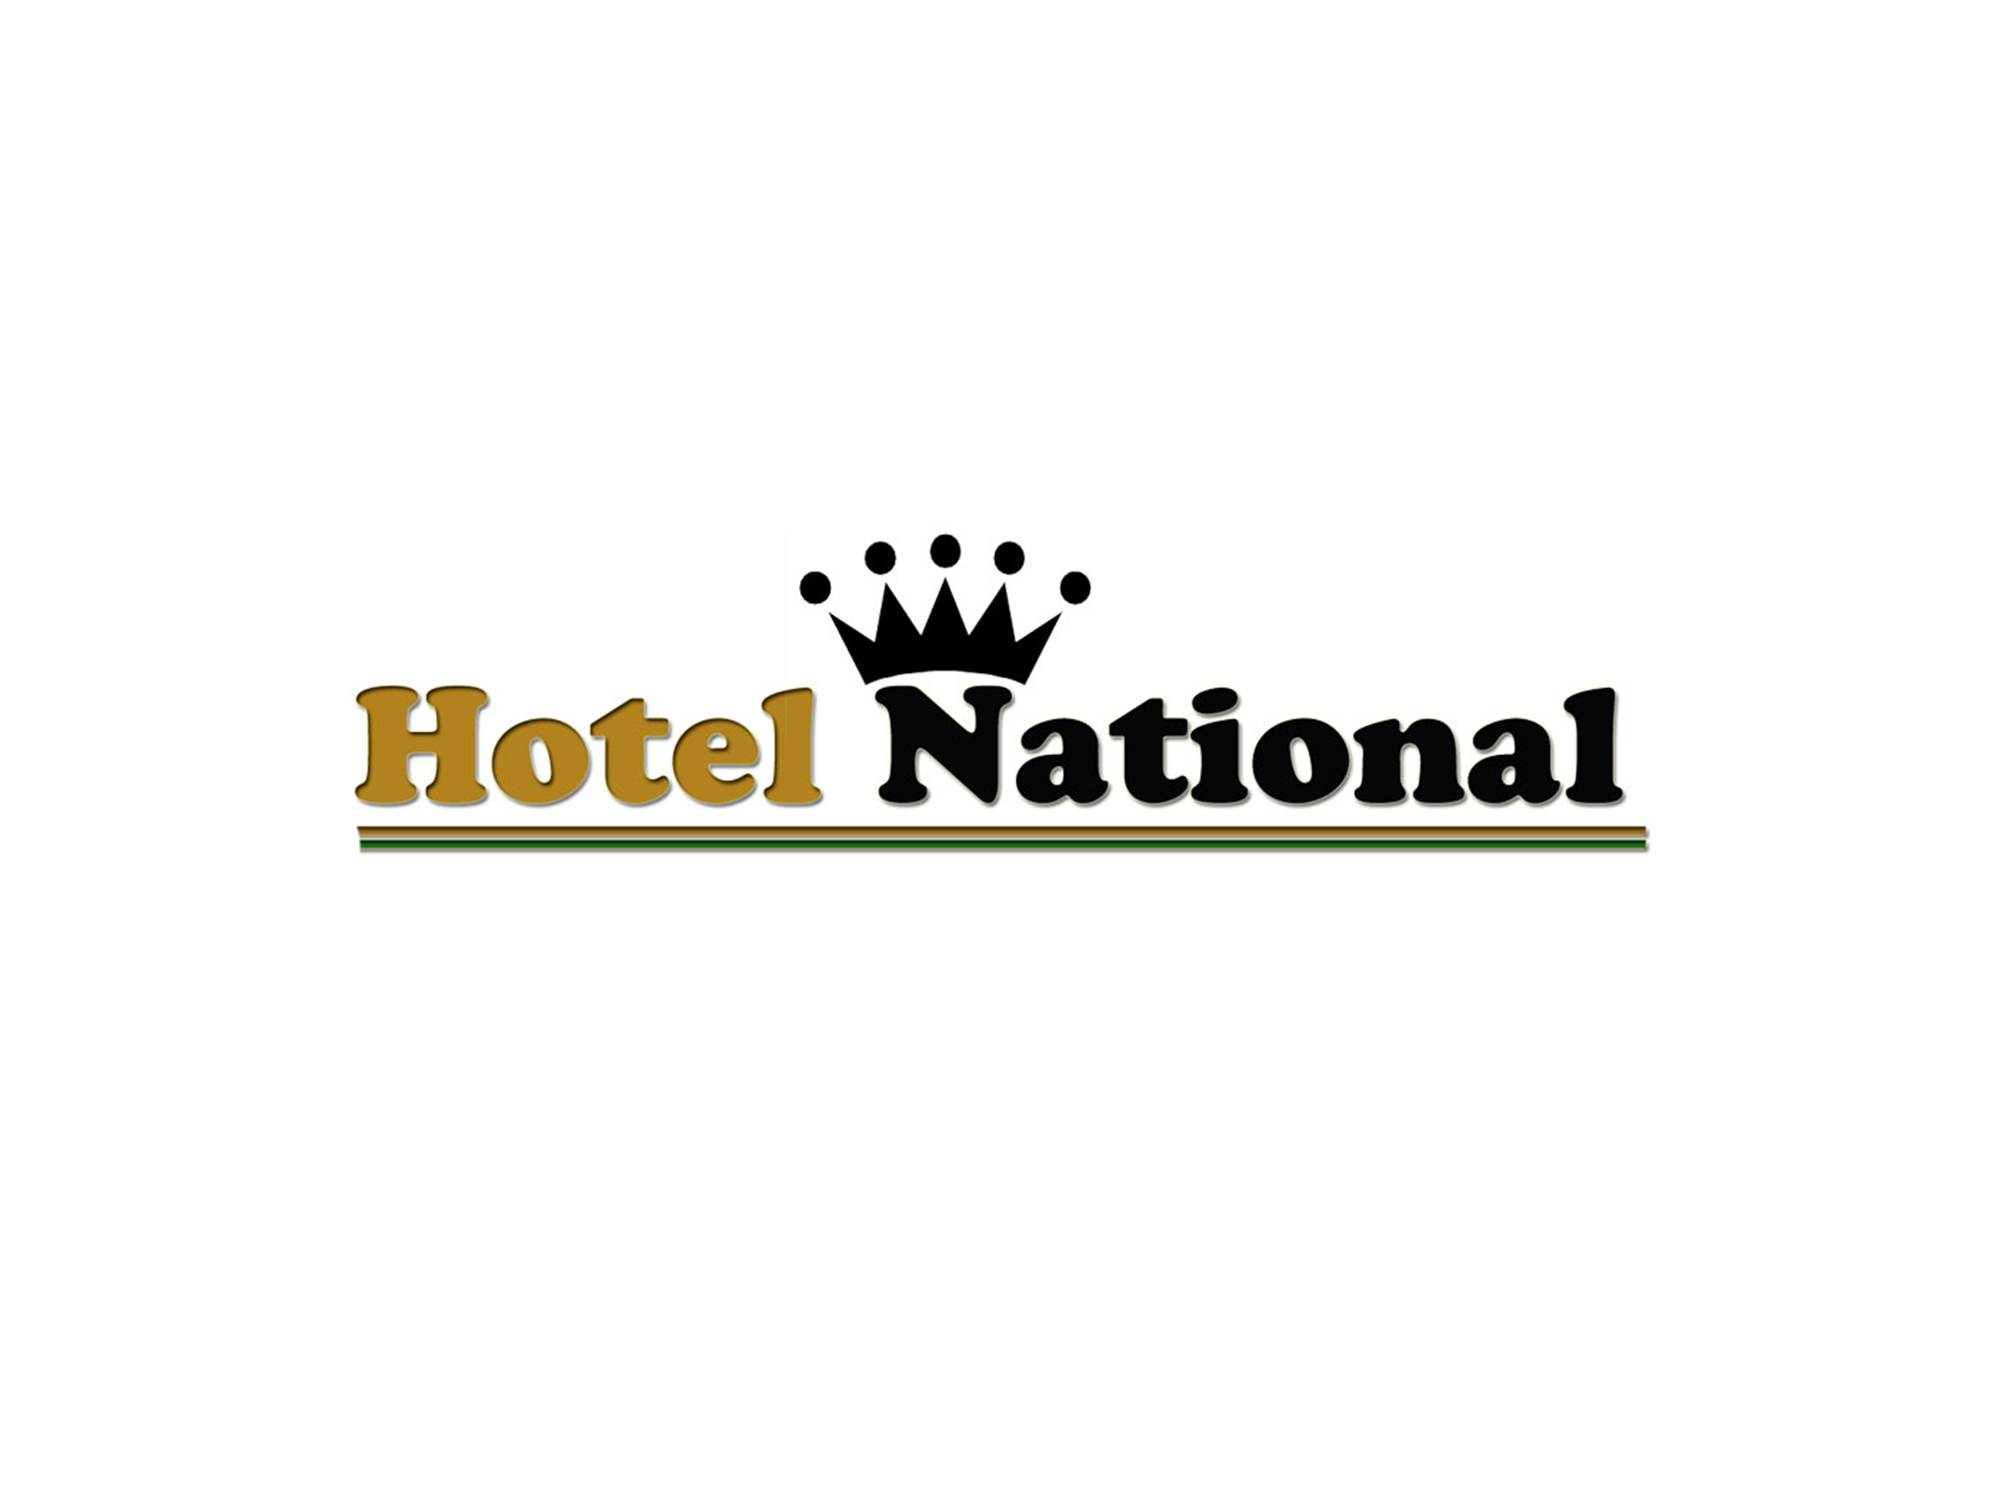 Hotel National- XpertLab Technologies Private Limited